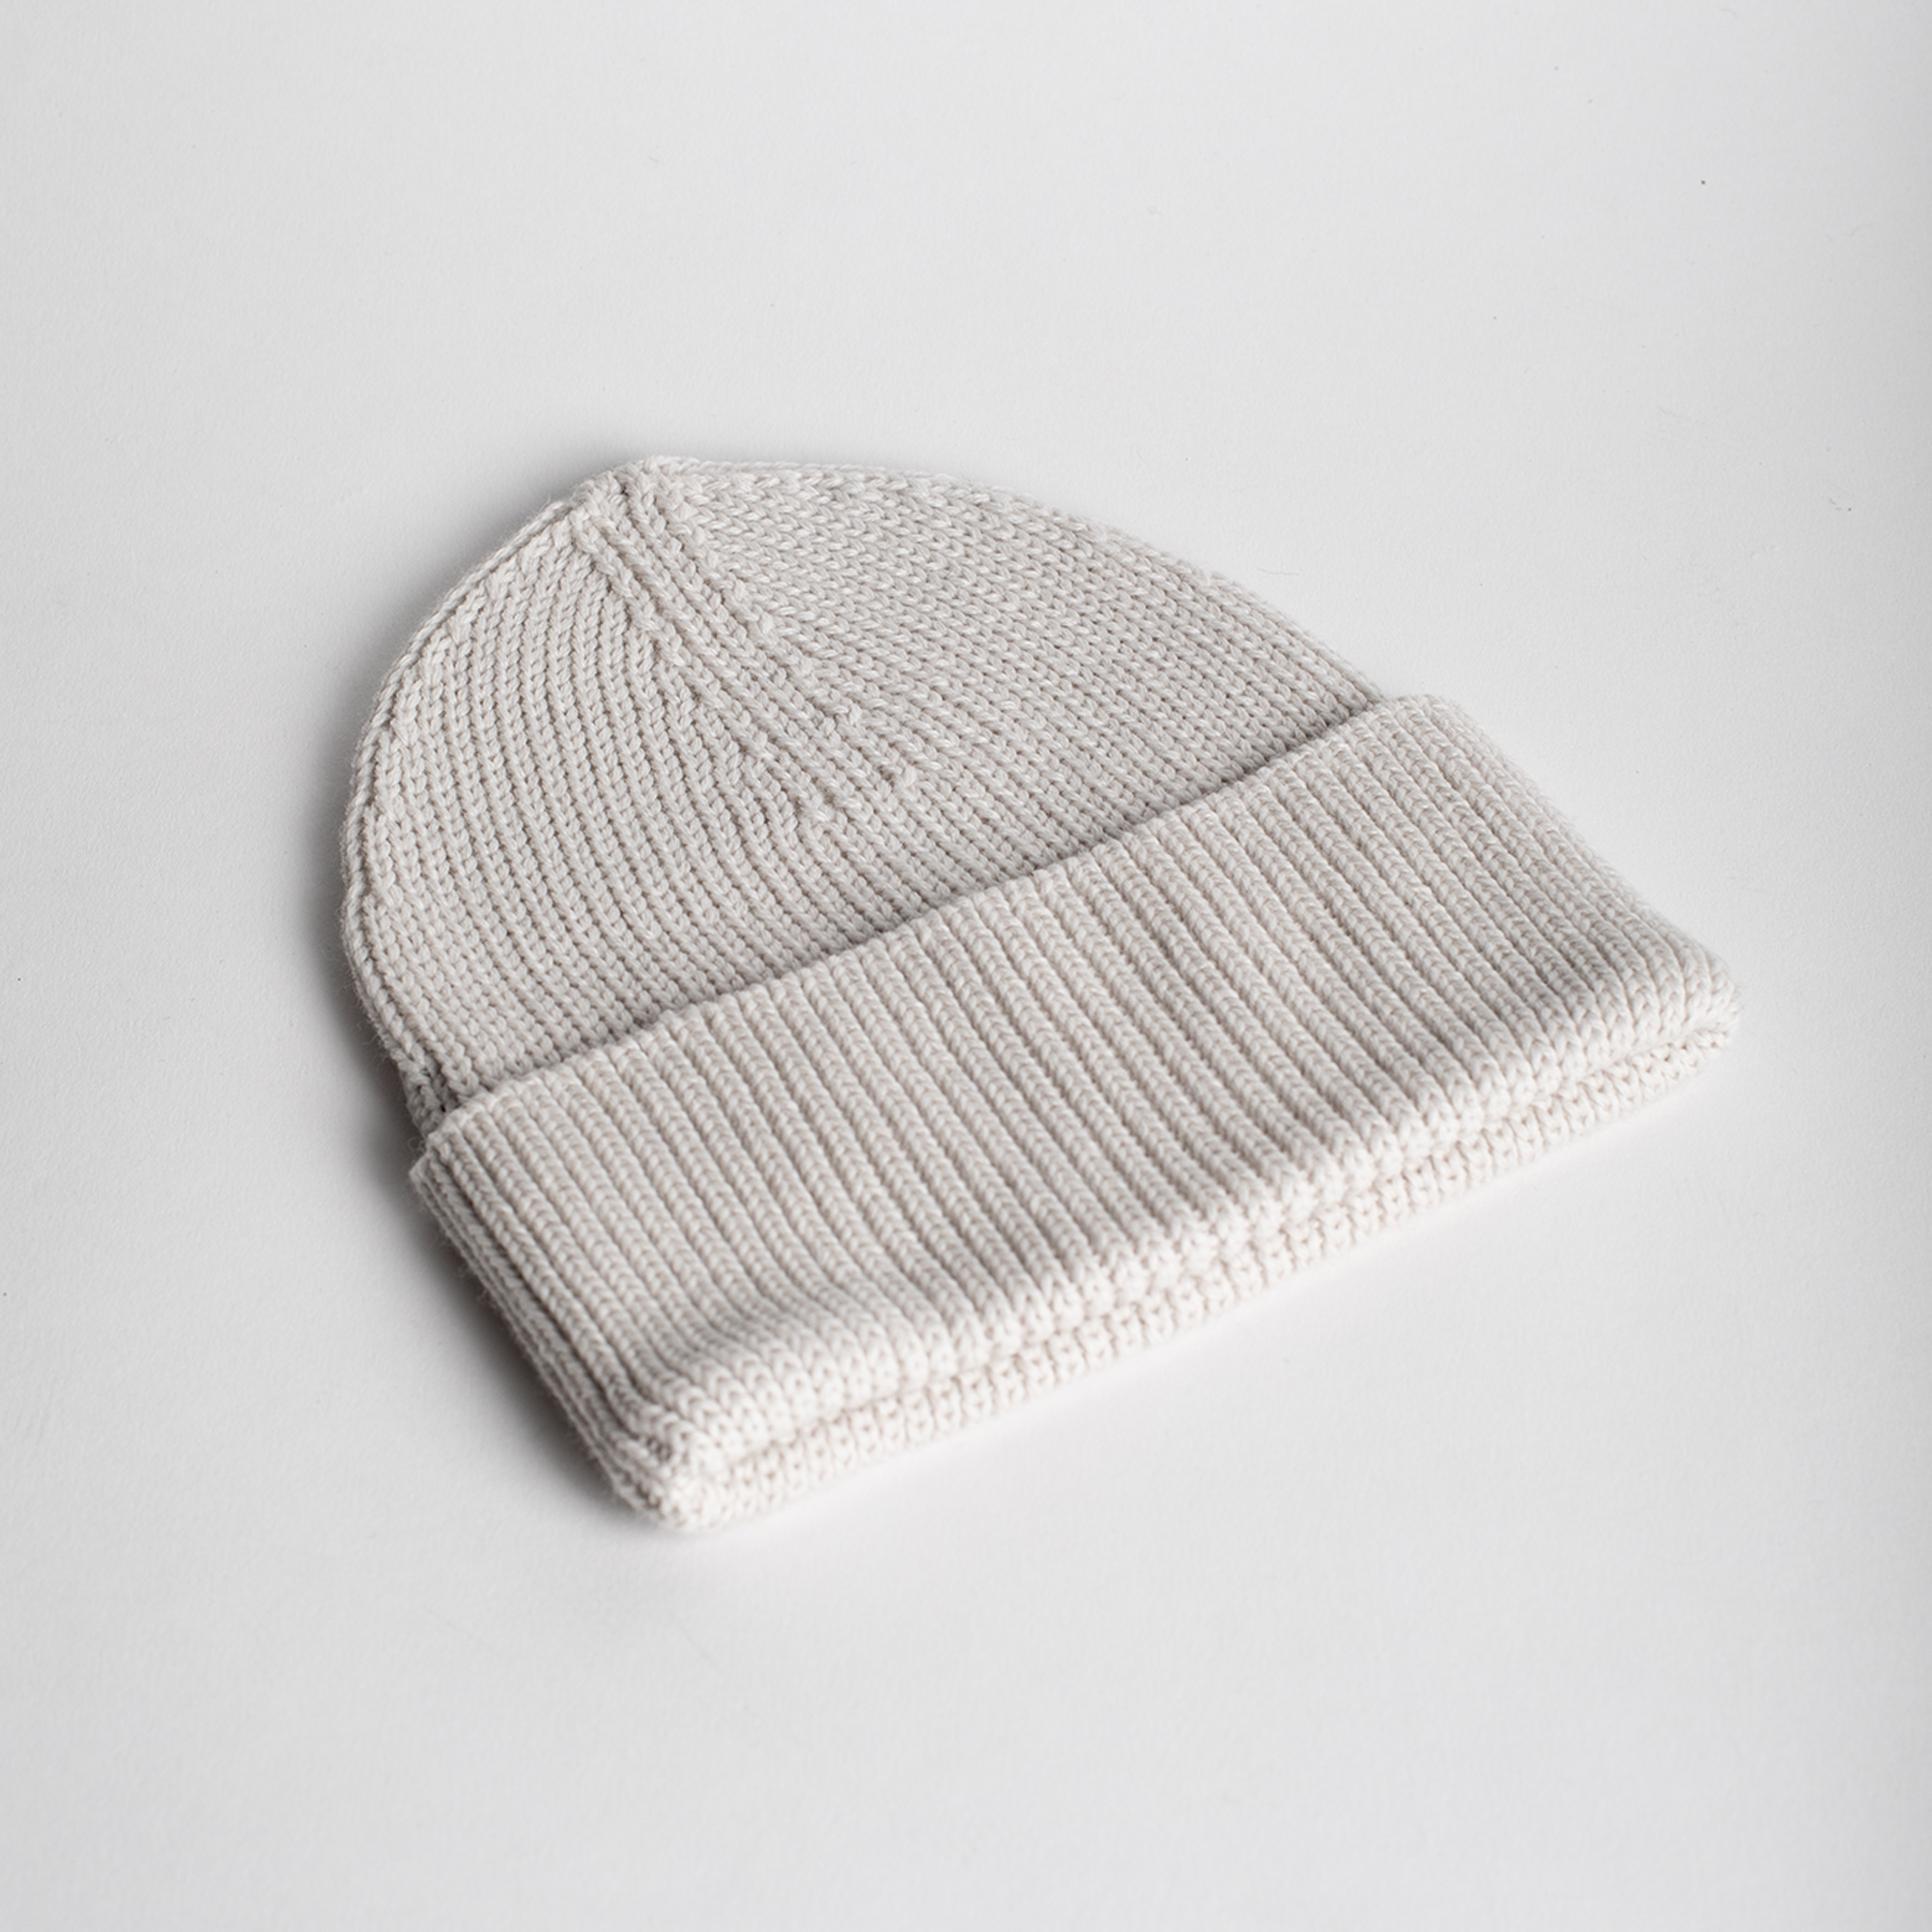 VICKO beanie in Cream color by Arpenteur